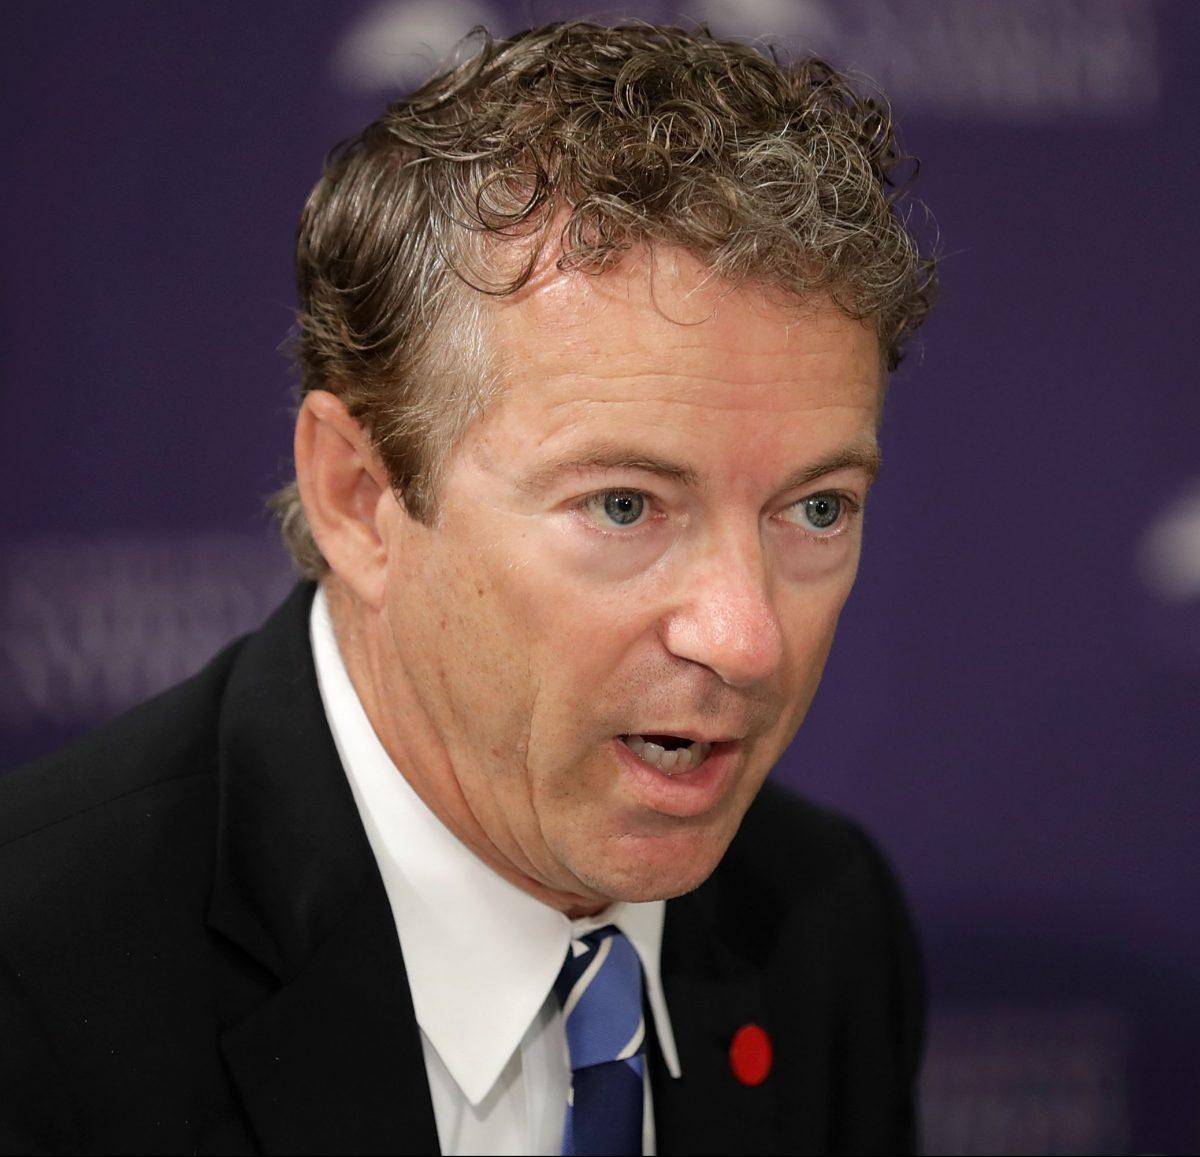 Sen. Rand Paul (R-Ky.) at the Center for the National Interest in Washington on Sept. 19, 2016. (Chip Somodevilla/Getty Images)